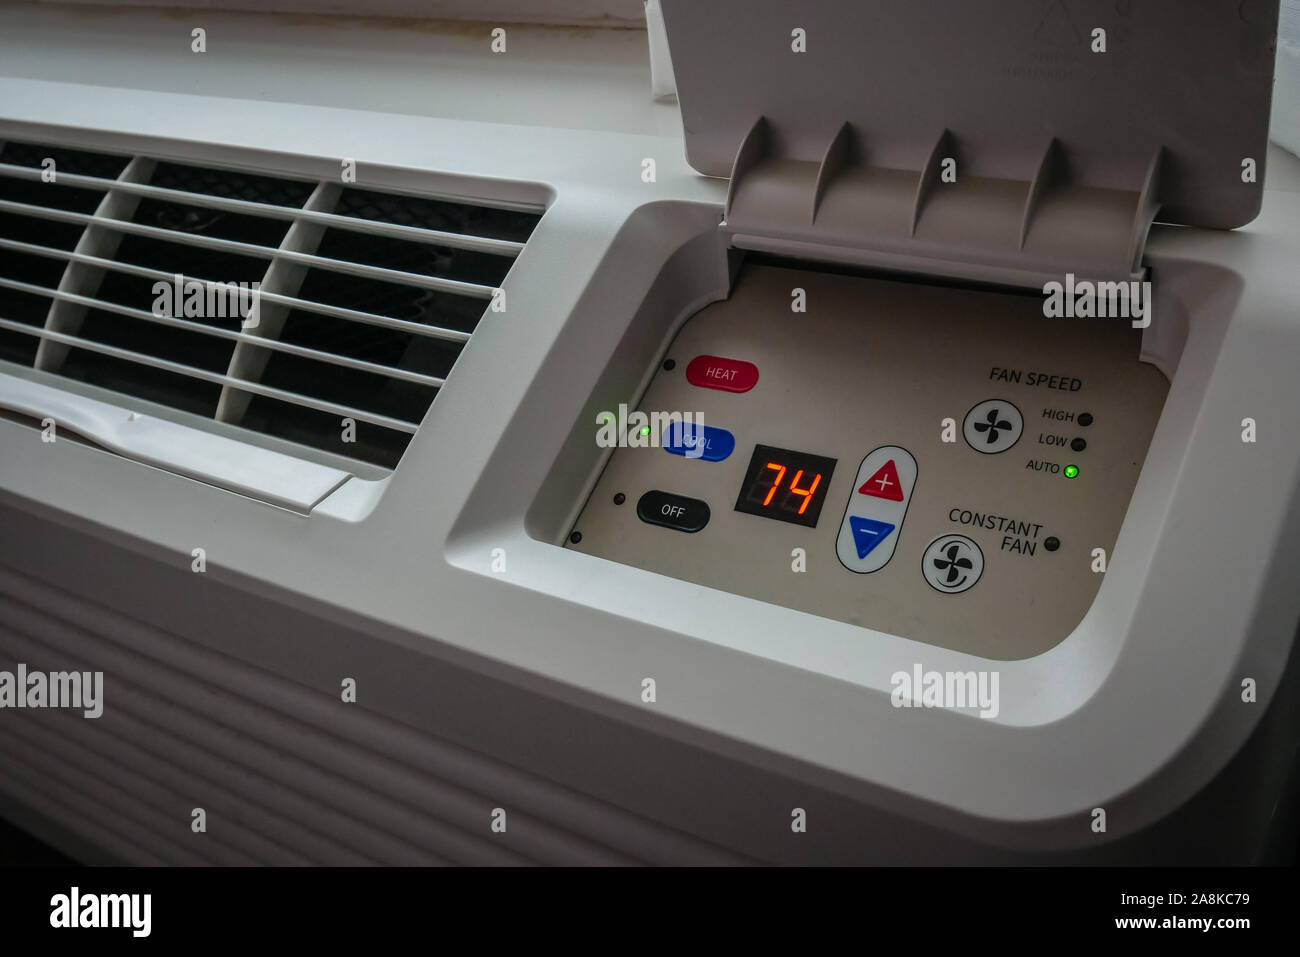 https://c8.alamy.com/comp/2A8KC79/north-american-temperature-control-panel-attached-to-the-air-conditioner-unit-in-an-old-hotel-room-display-74f-2A8KC79.jpg